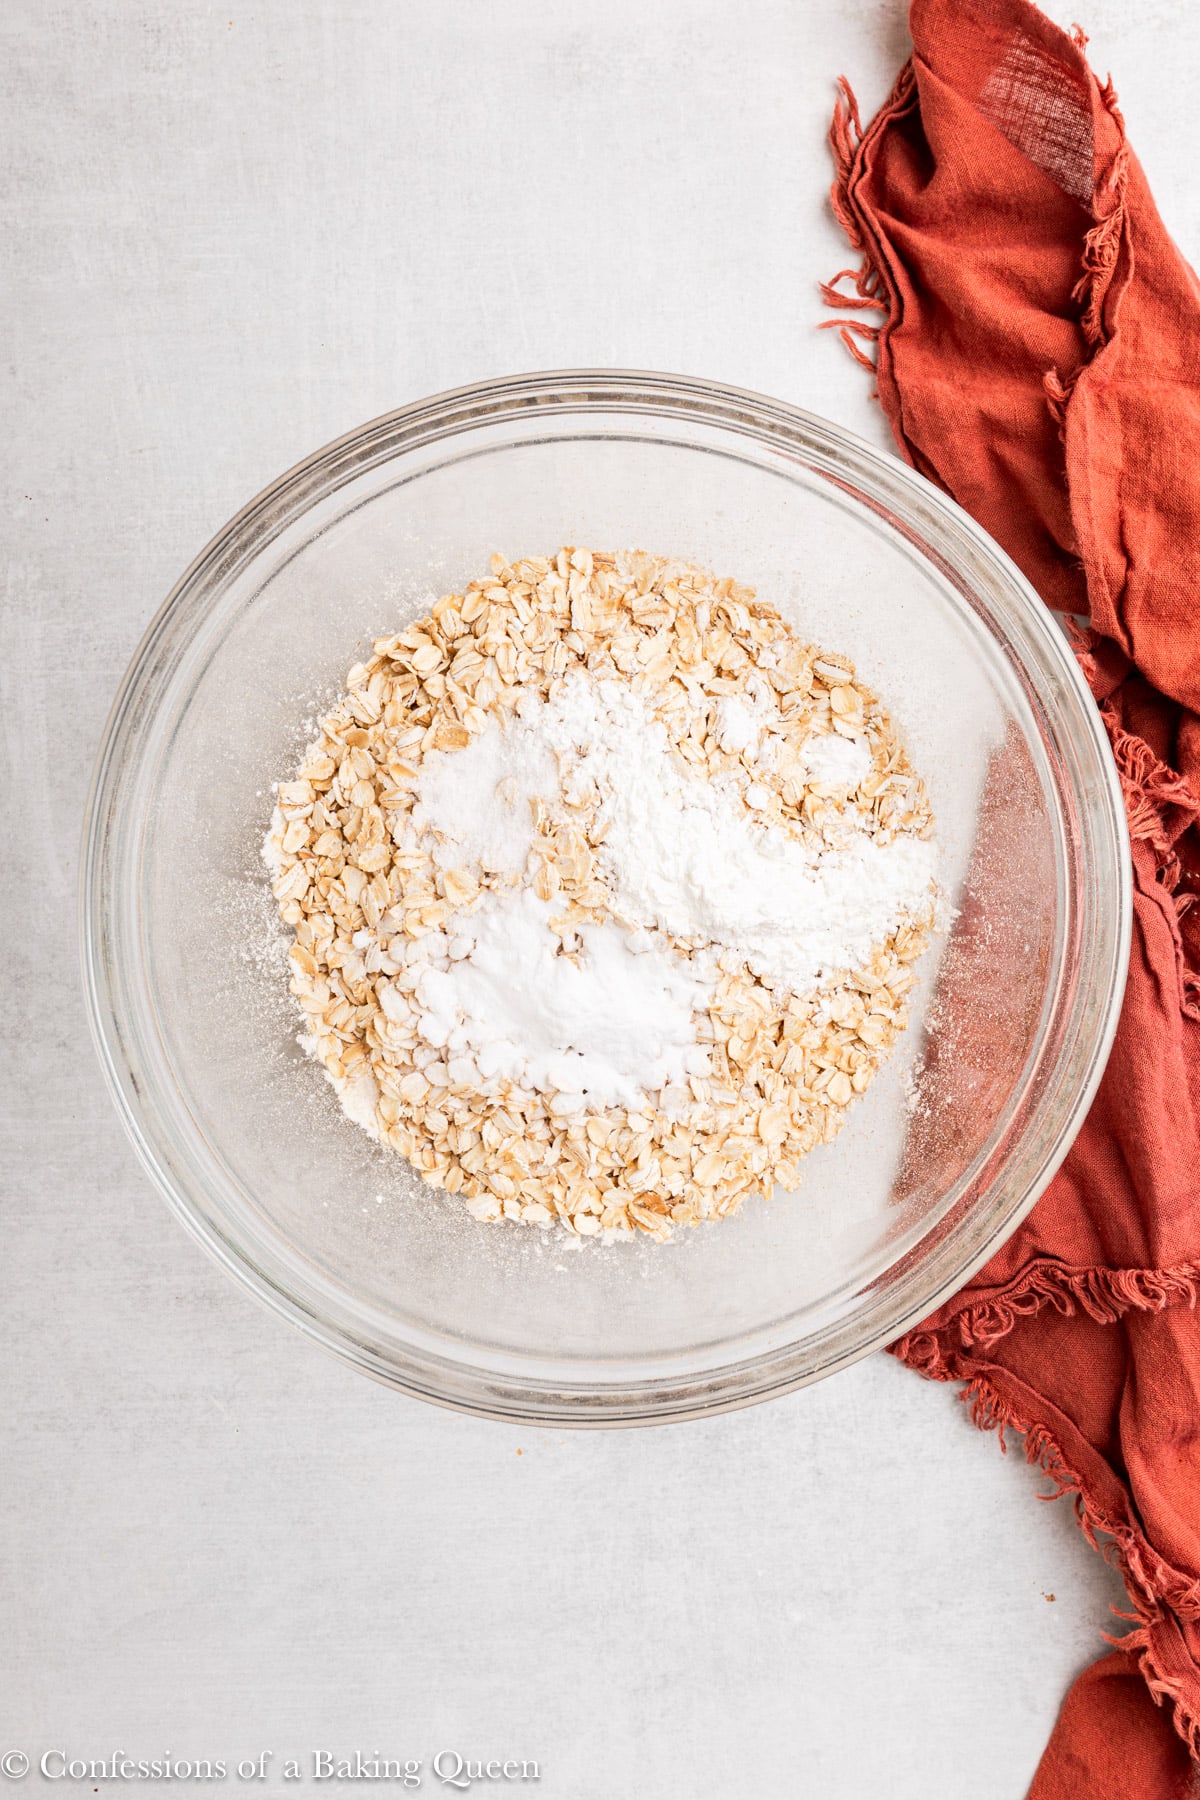 dry ingredients mixed together in a glass bowl on a grey surface with an orange linen.